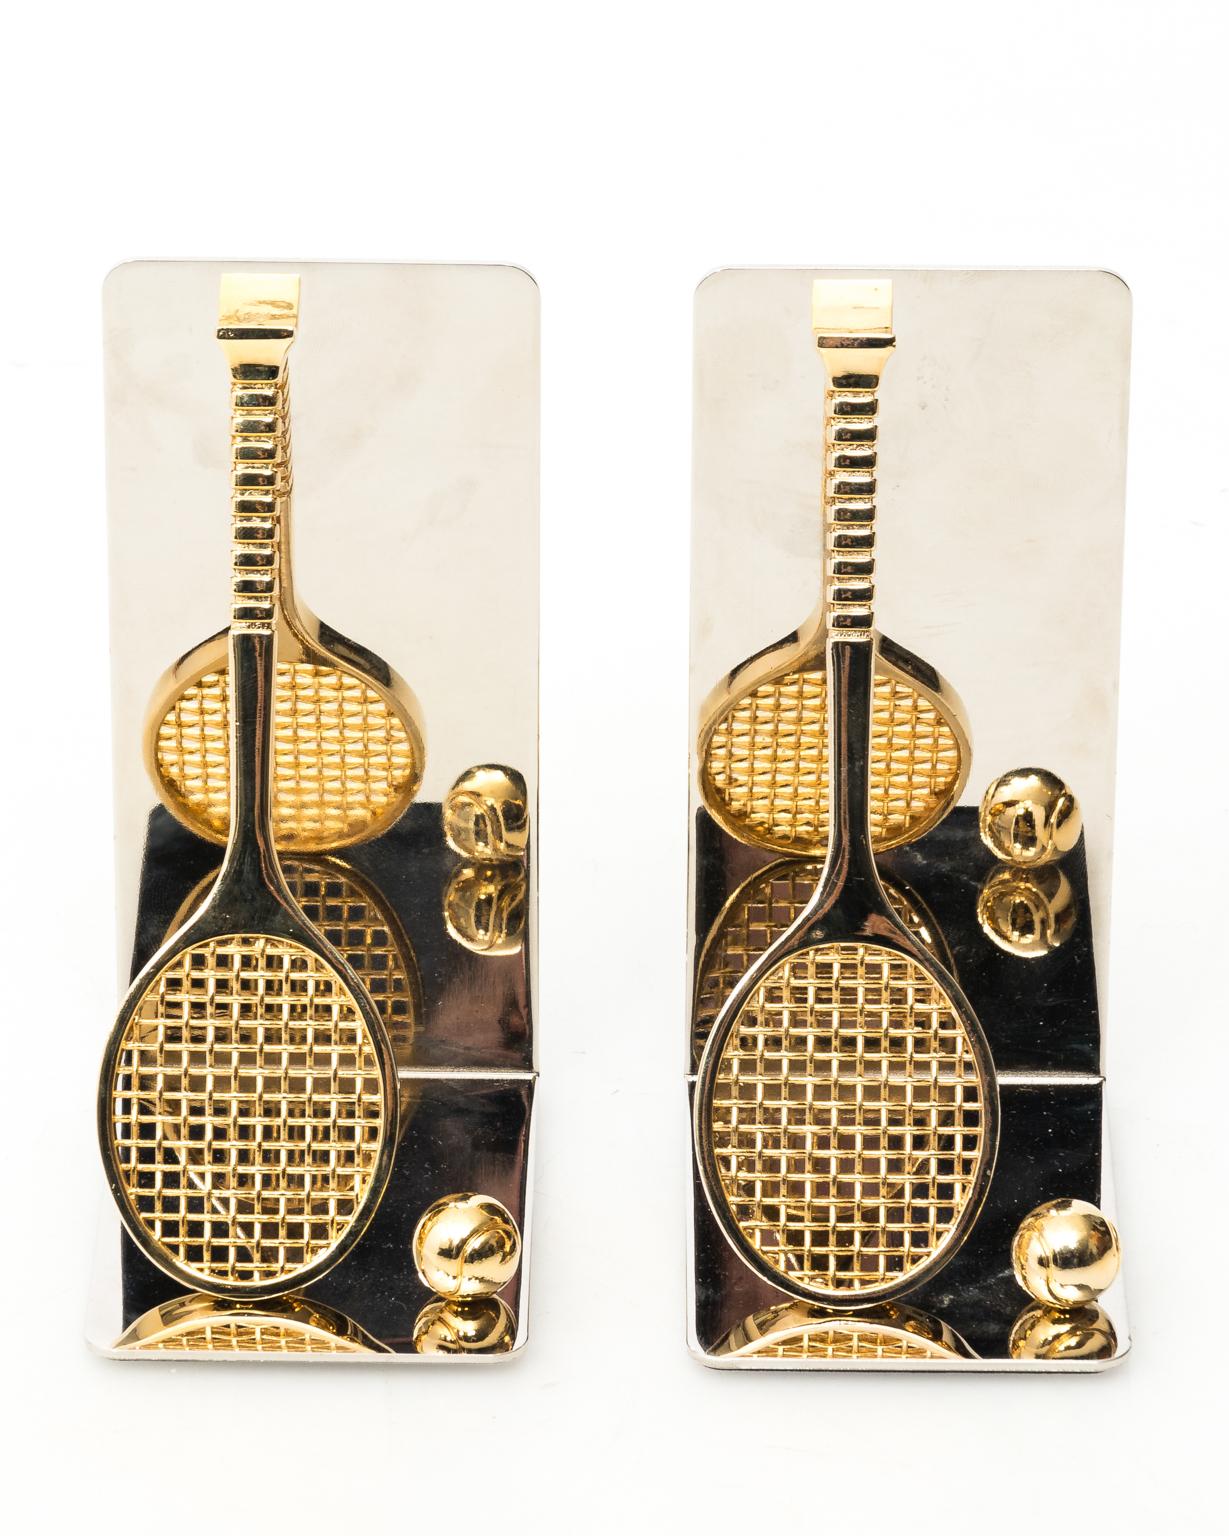 20th Century Pair of Chrome and Brass Tennis Racket Bookends, circa 1970s